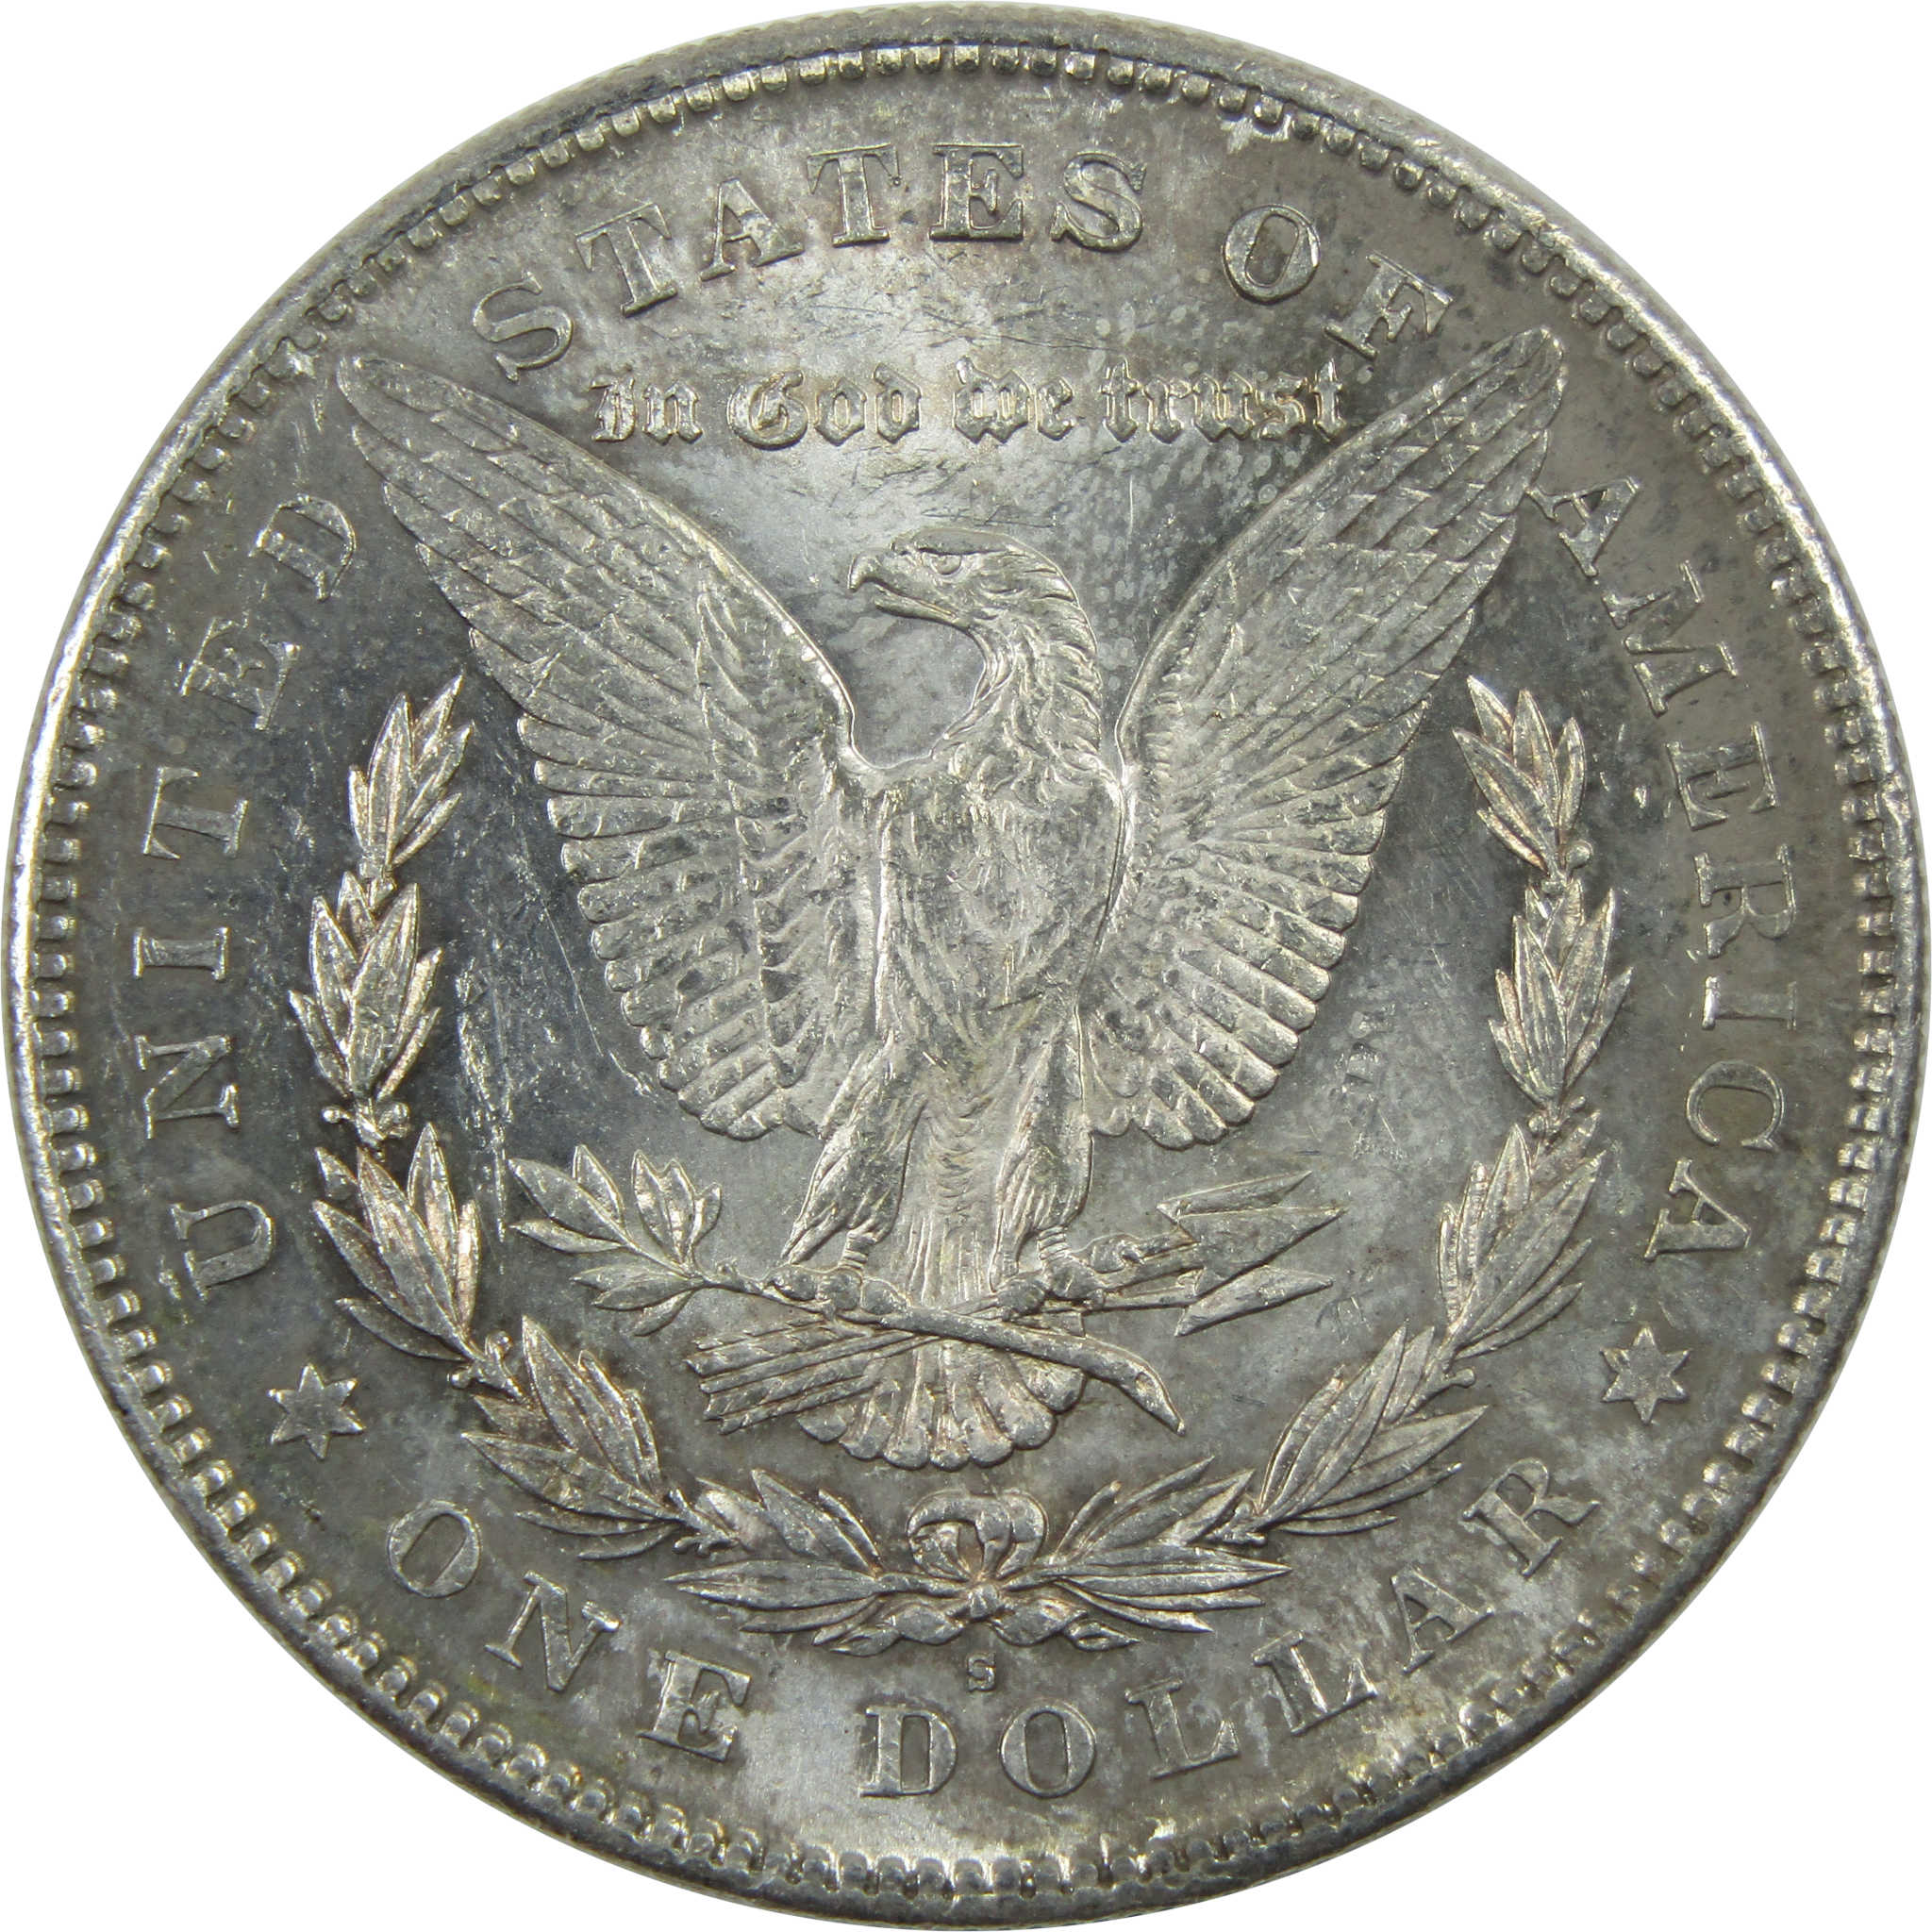 1878 S Morgan Dollar AU About Uncirculated Silver $1 Coin SKU:I11684 - Morgan coin - Morgan silver dollar - Morgan silver dollar for sale - Profile Coins &amp; Collectibles